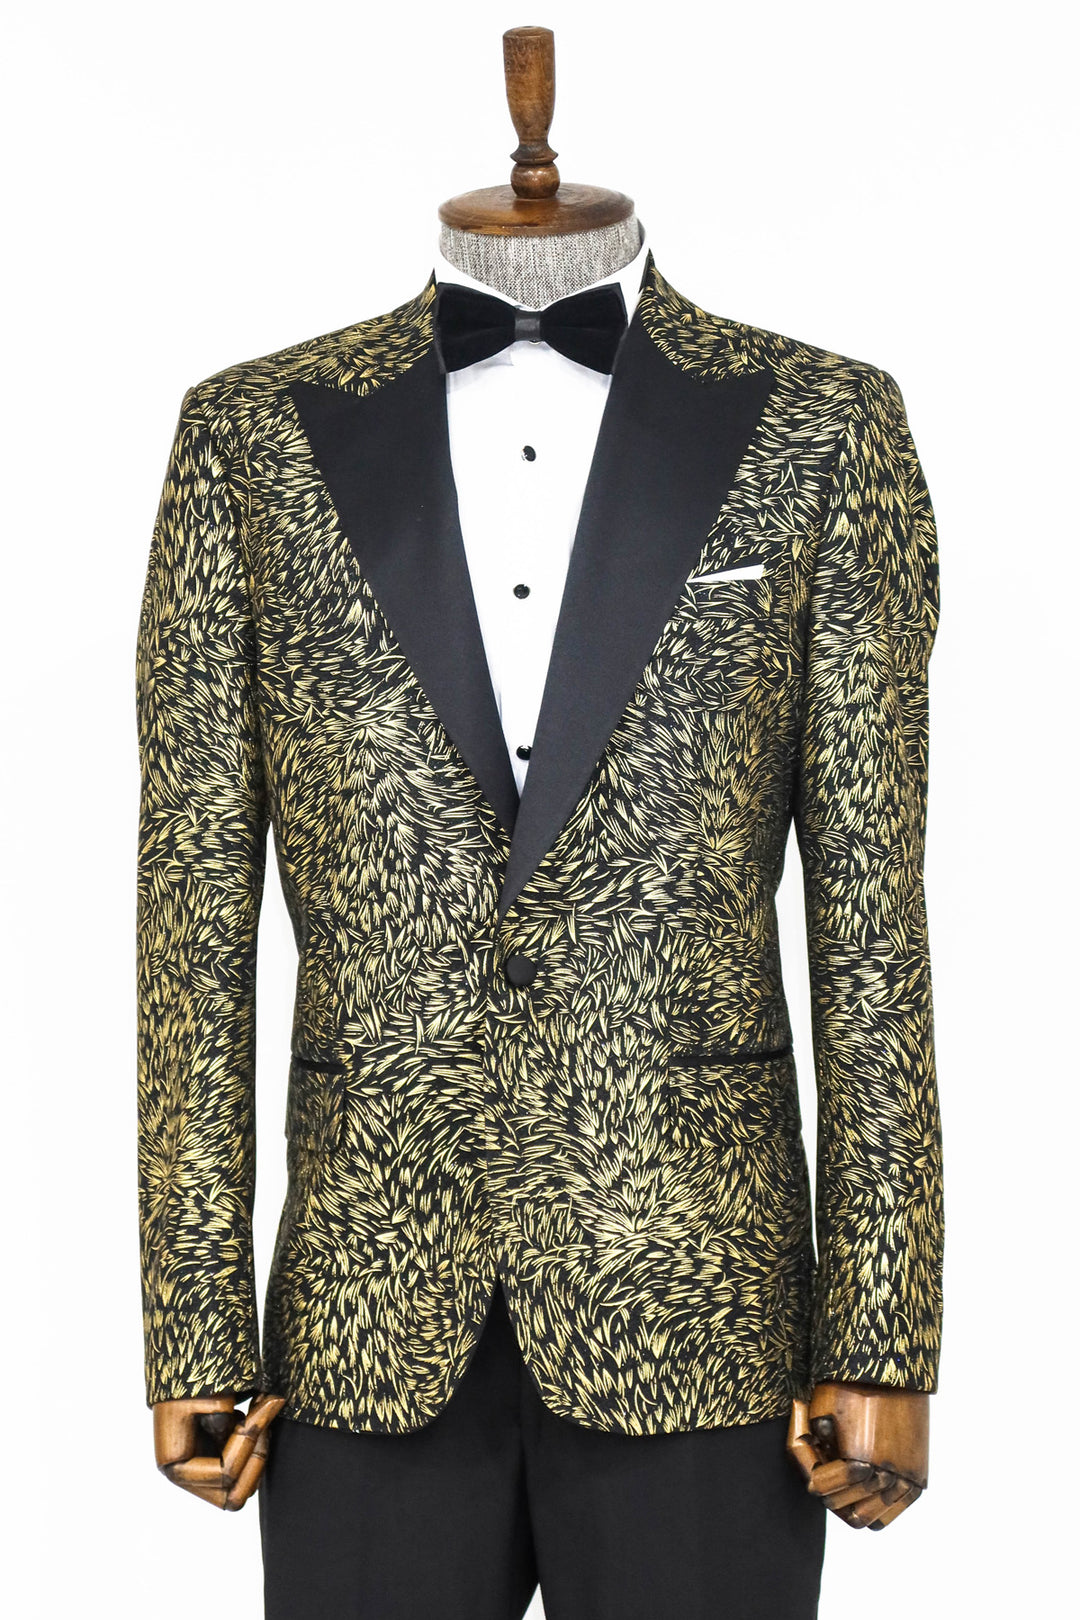 Feather Patterned Slim Fit Black Men Prom Blazer and Trousers Combination - Wessi